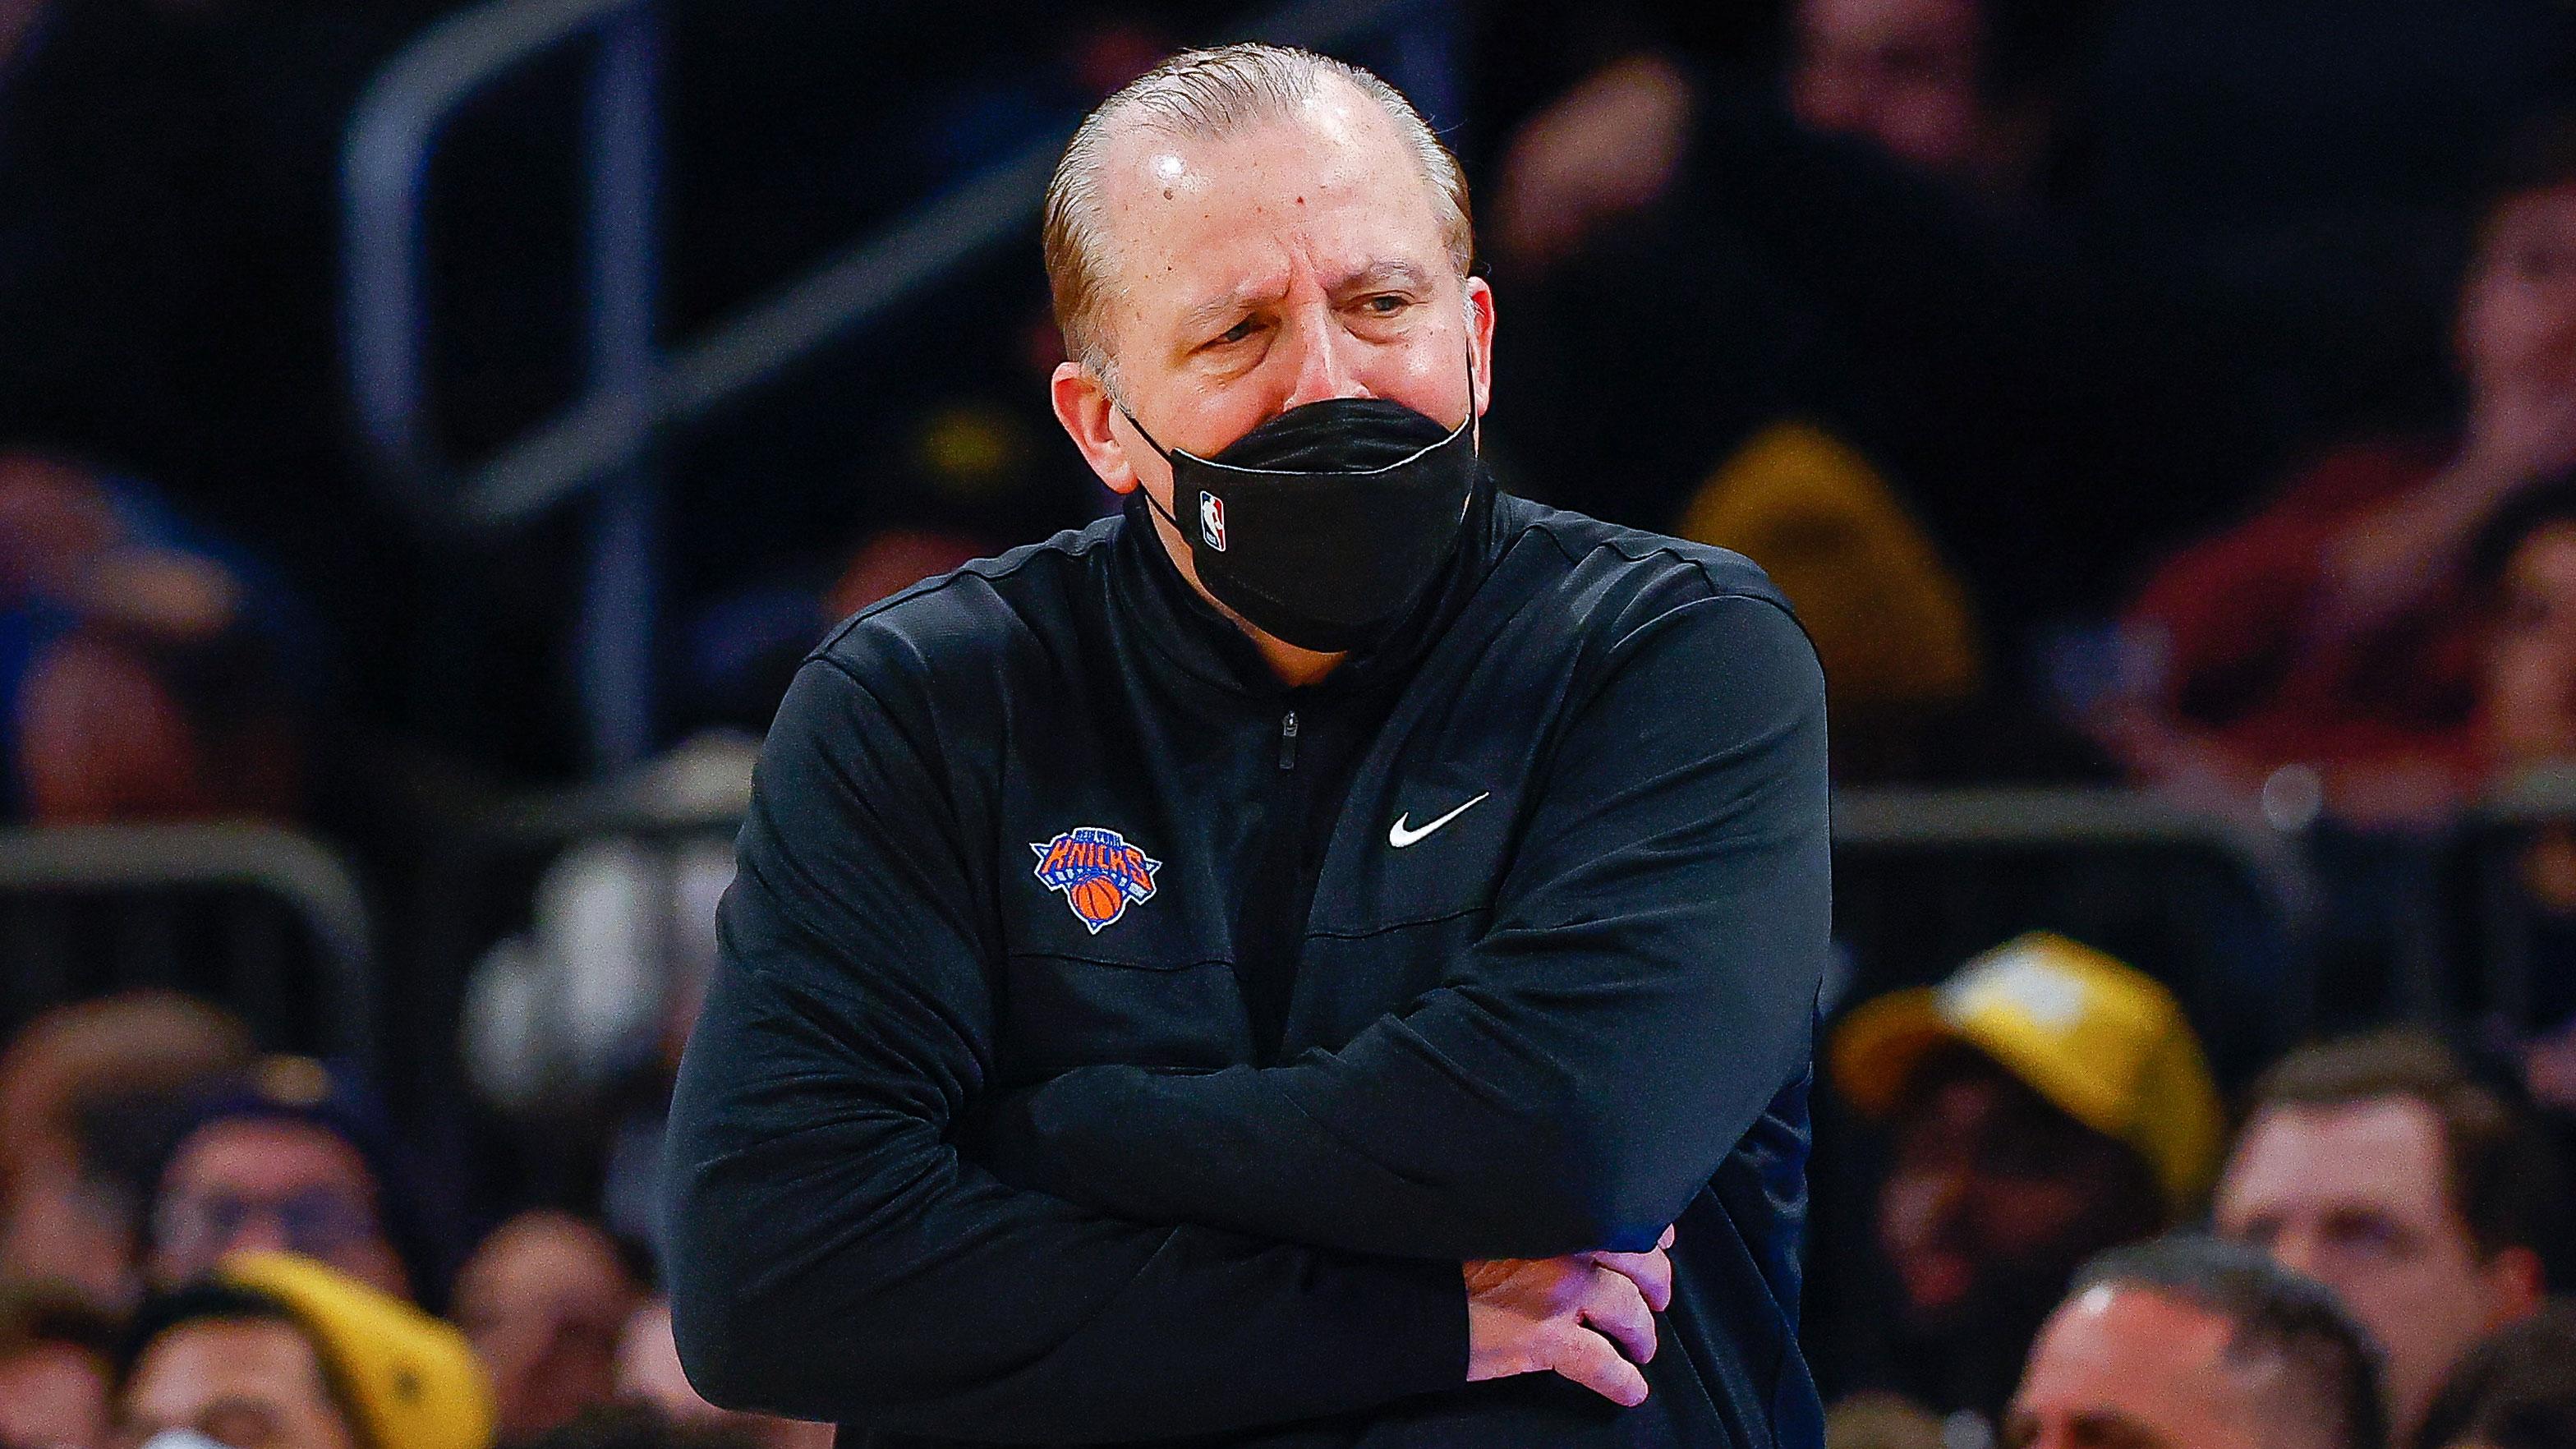 Jan 10, 2022; New York, New York, USA; New York Knicks head coach Tom Thibodeau looks on against the San Antonio Spurs during the second half at Madison Square Garden. / Vincent Carchietta-USA TODAY Sports